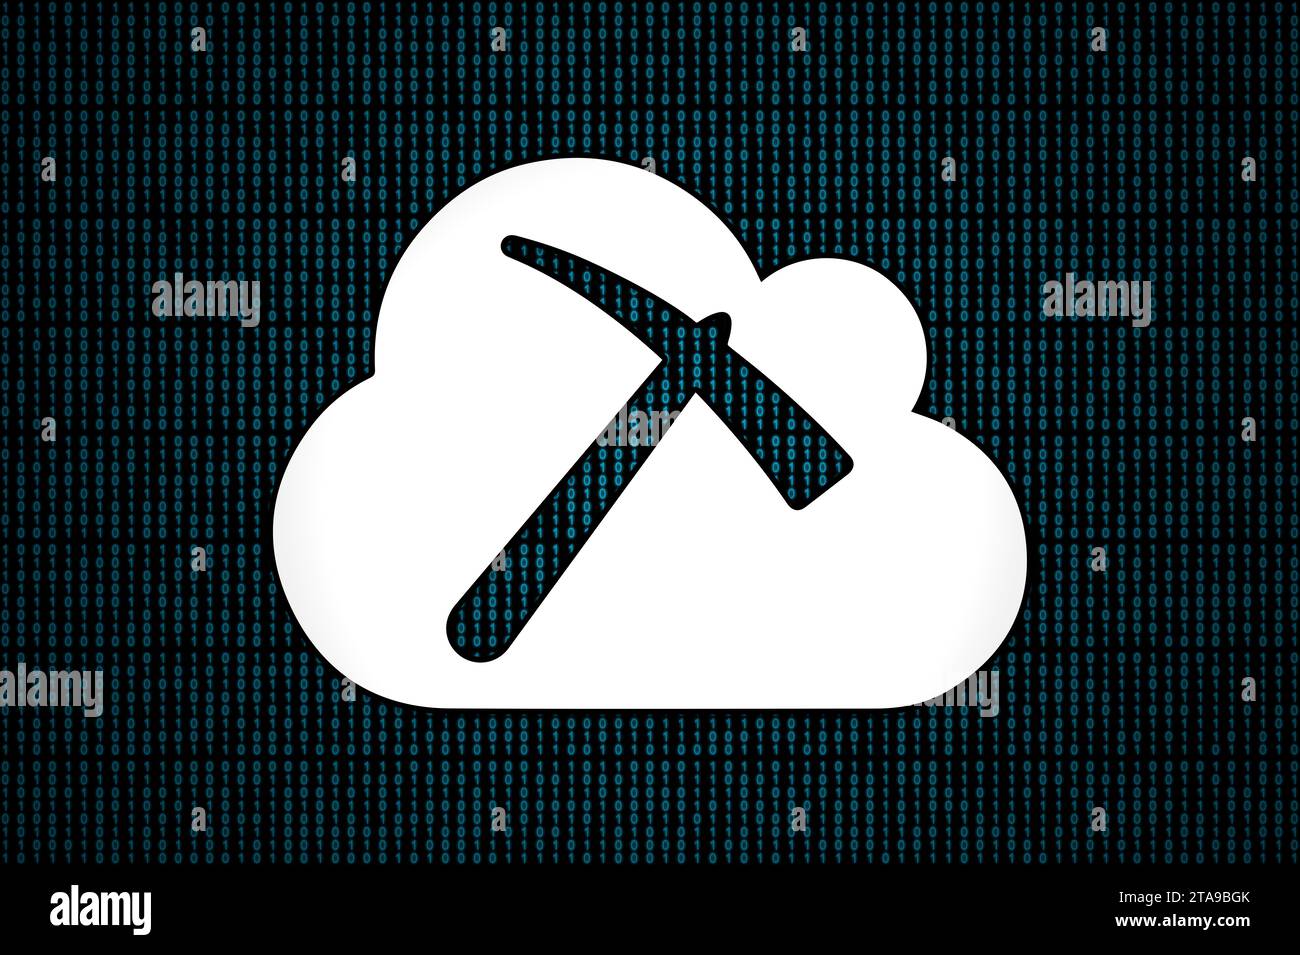 Cloud mining on a binary code background. Stock Photo